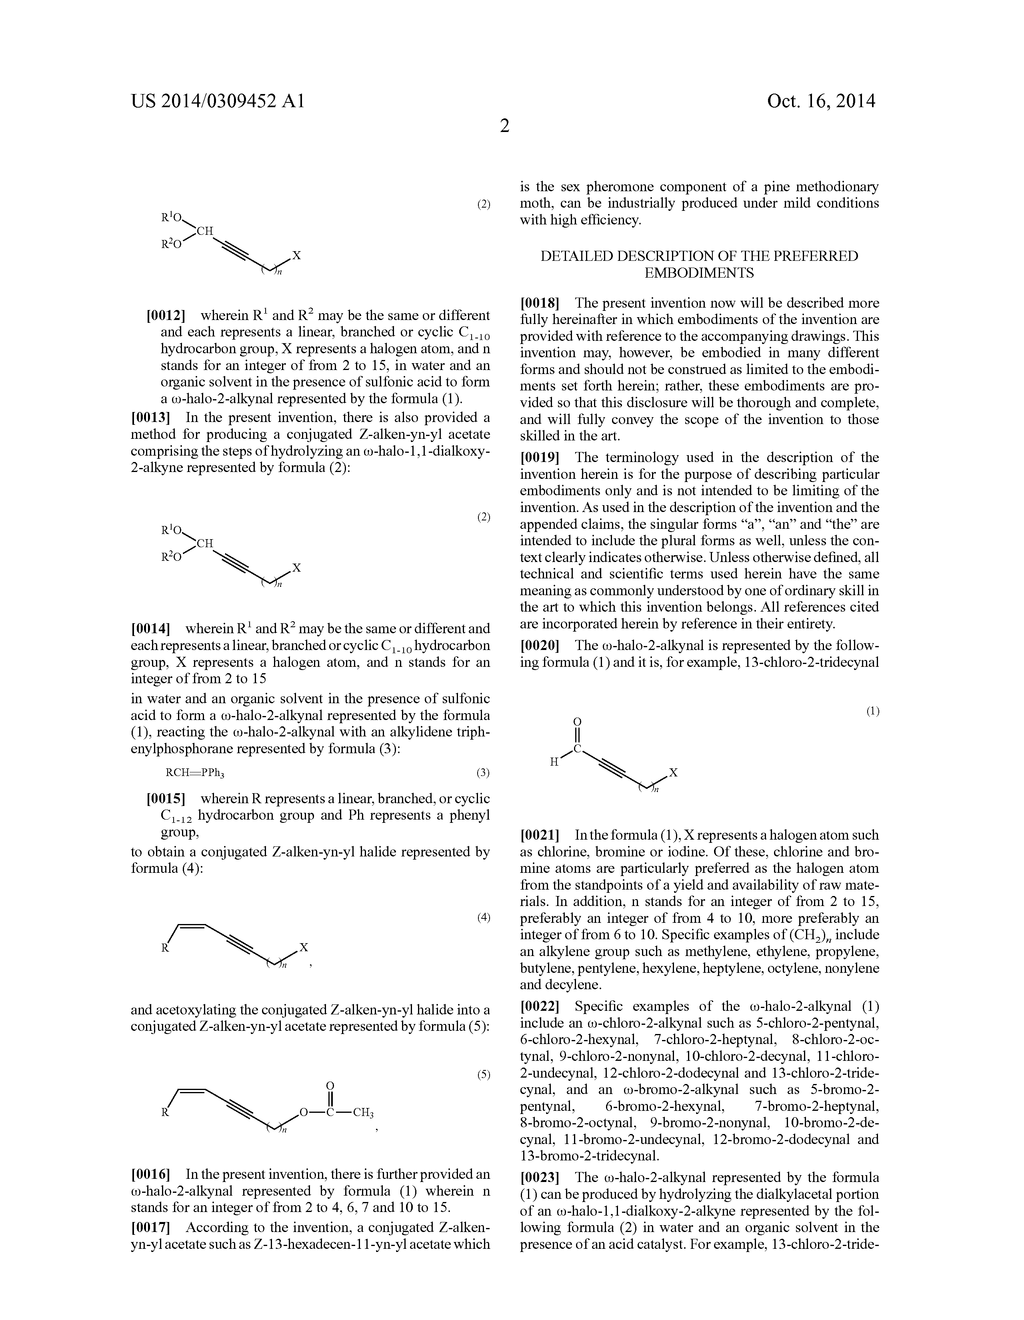 OMEGA-HALO-2-ALKYNAL, METHOD FOR PRODUCING SAME, AND METHOD FOR PRODUCING     CONJUGATED Z-ALKEN-YN-YL ACETATE USING SAME - diagram, schematic, and image 03